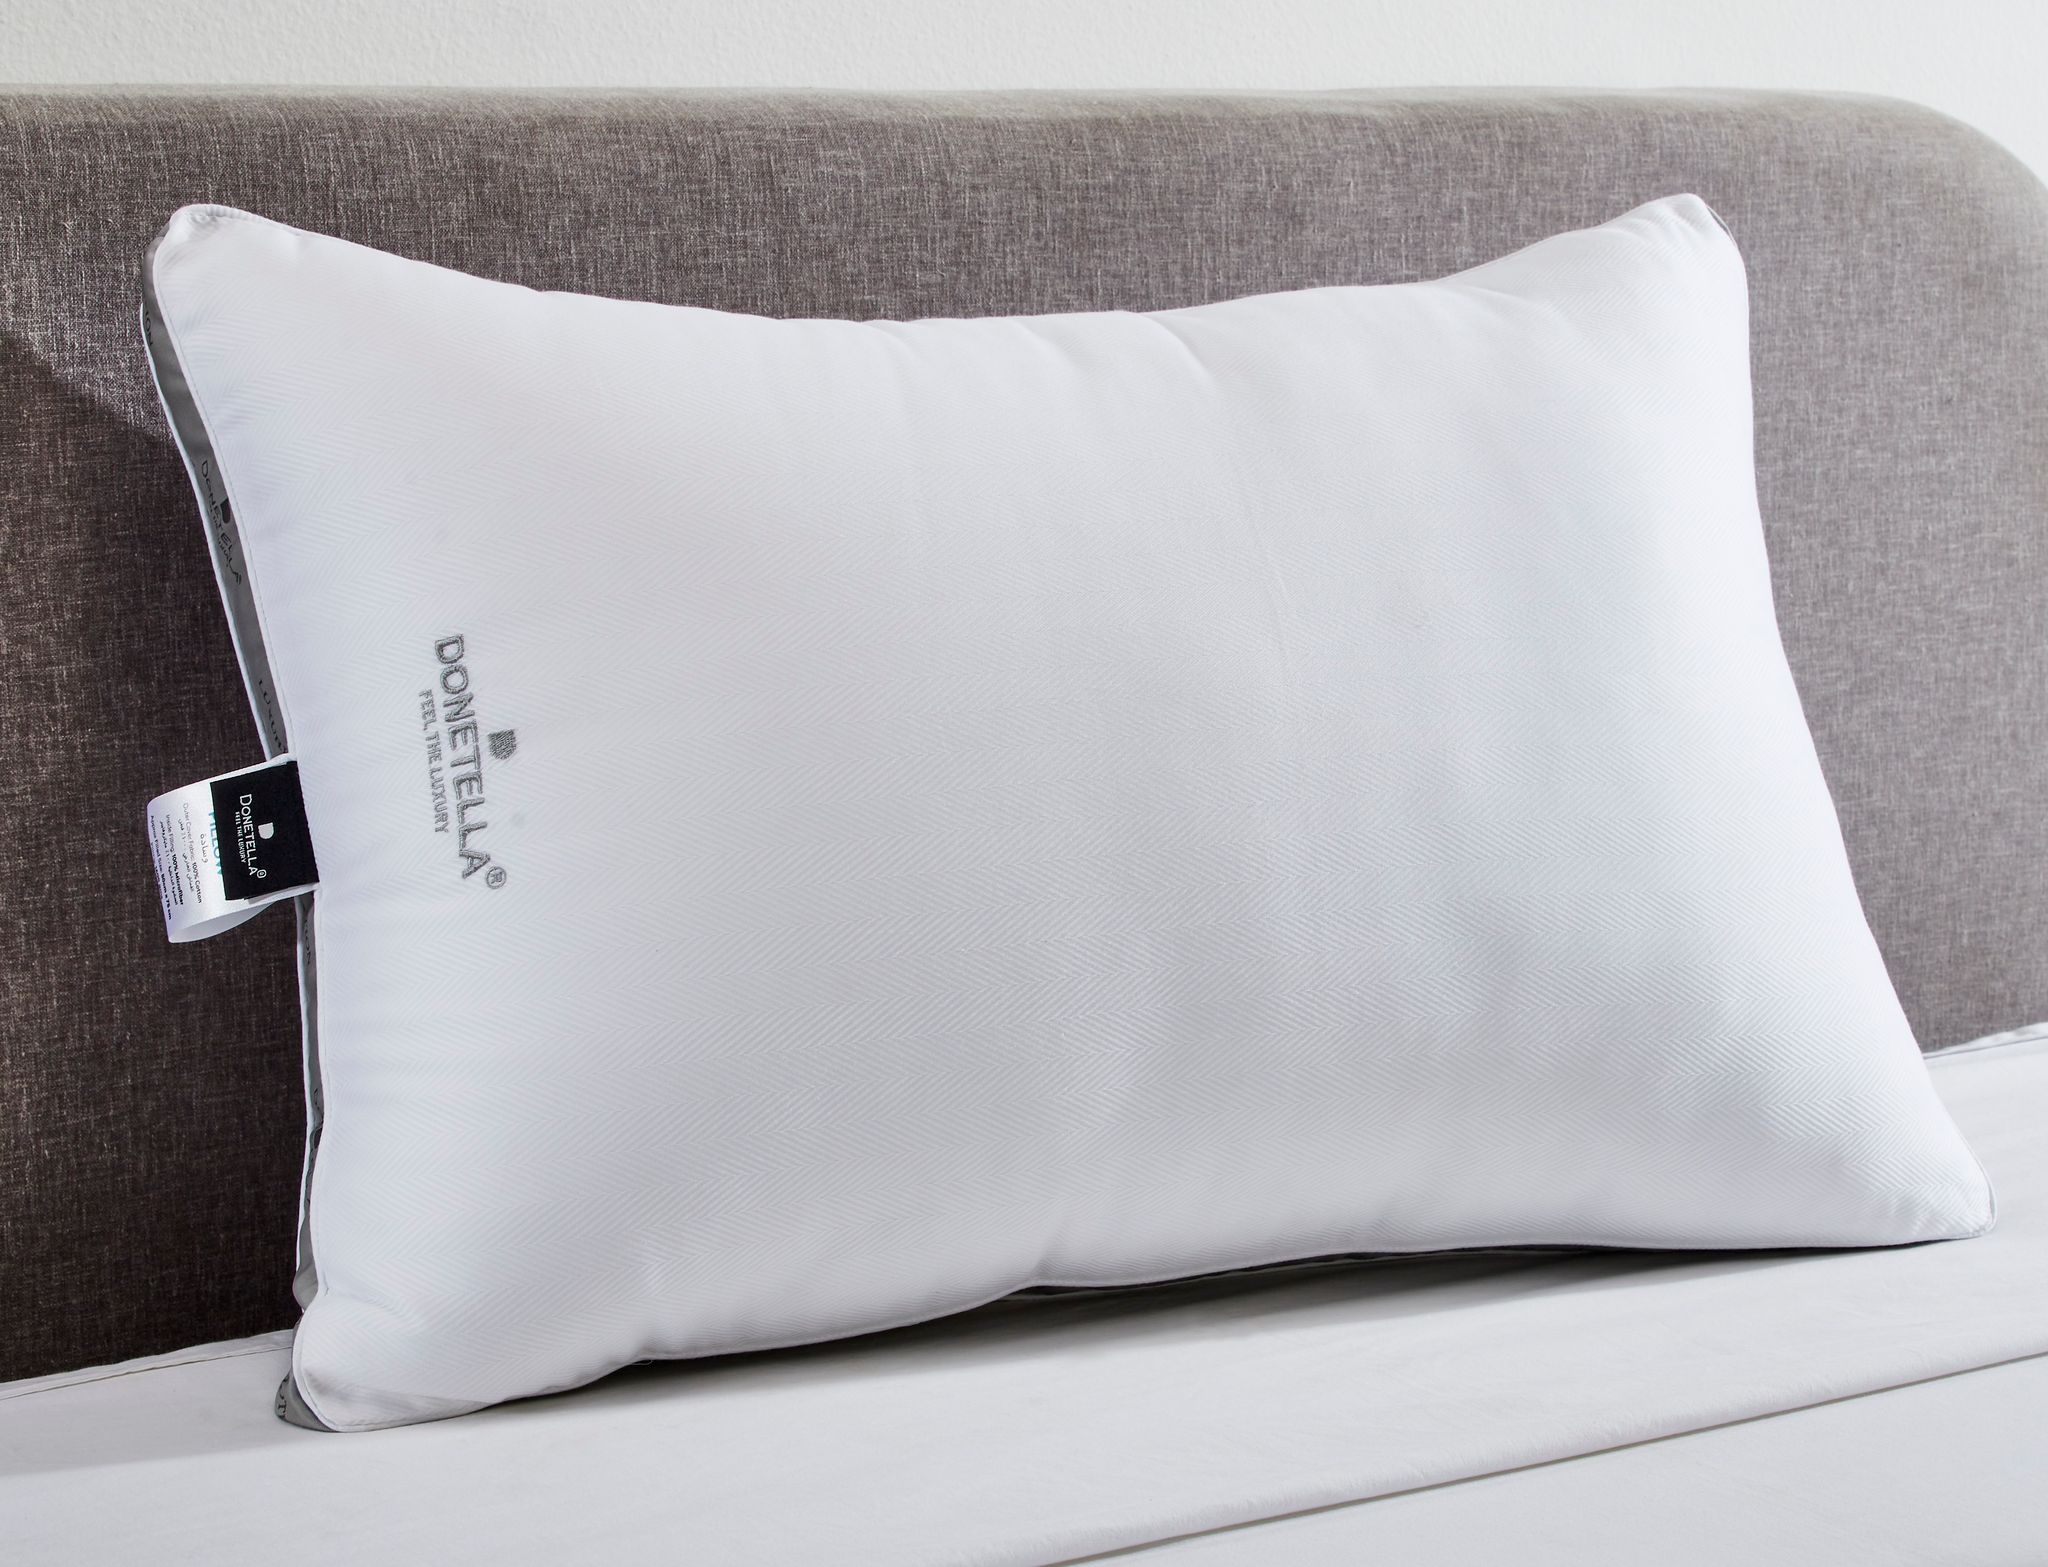 Premium Hotel Pillow 1-Piece(1600 g) Size 50x75 cm Luxury Down Alternative Filling With Natural Cotton Cover Skin-Friendly